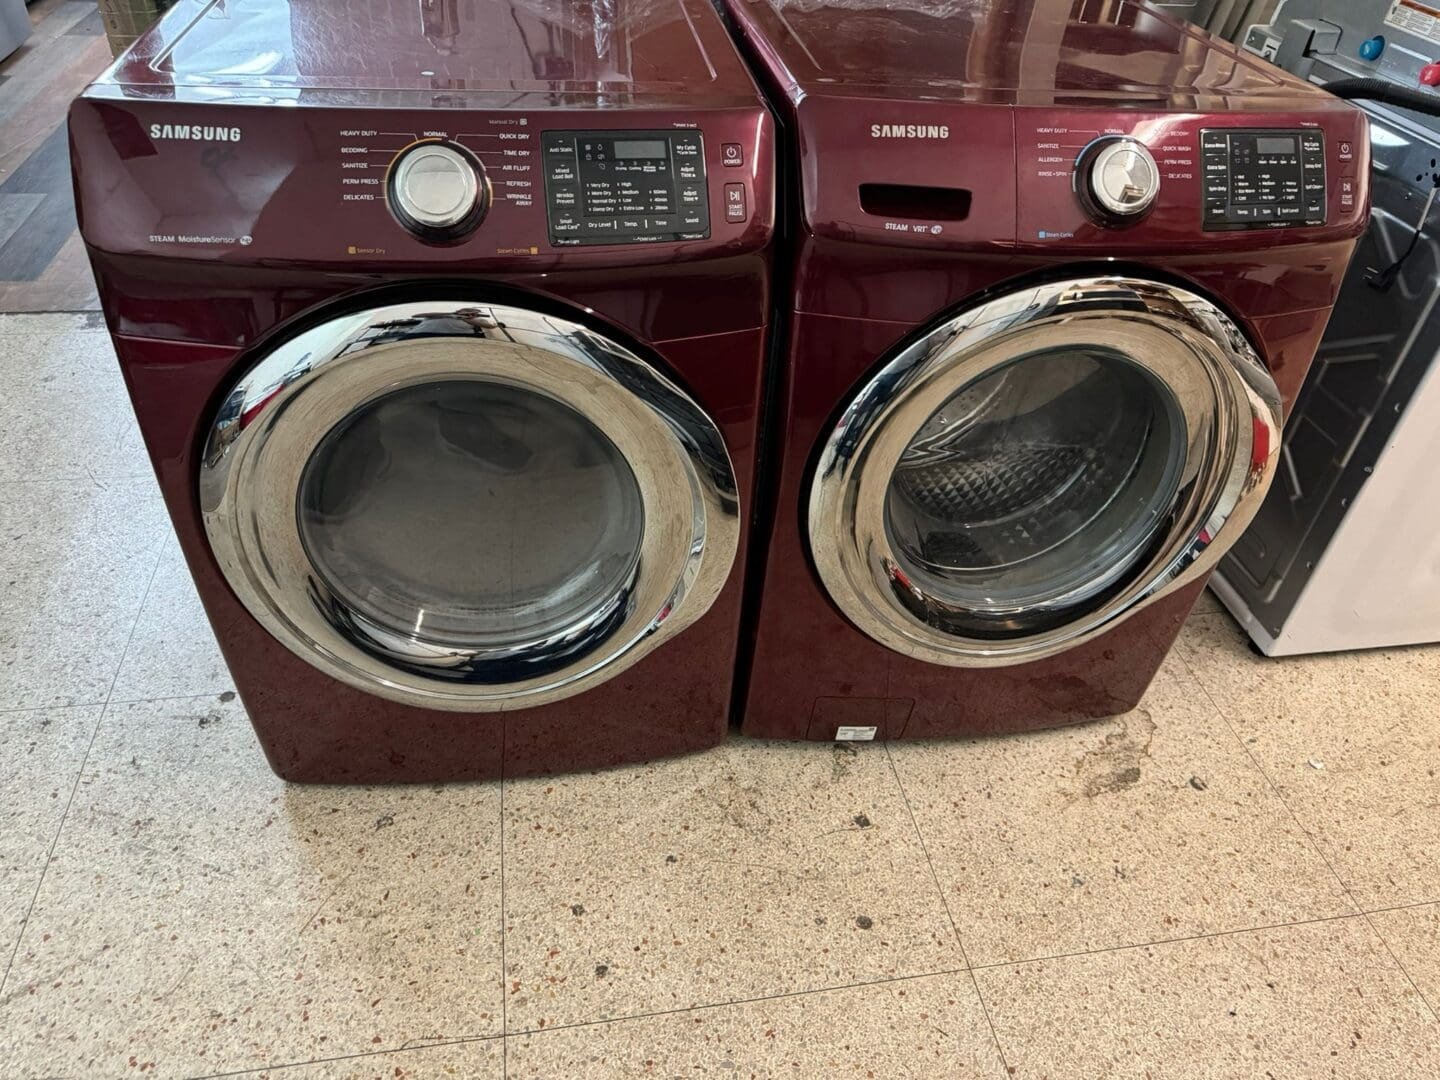 Samsung Used Front Load Washer Dryer Set – Red